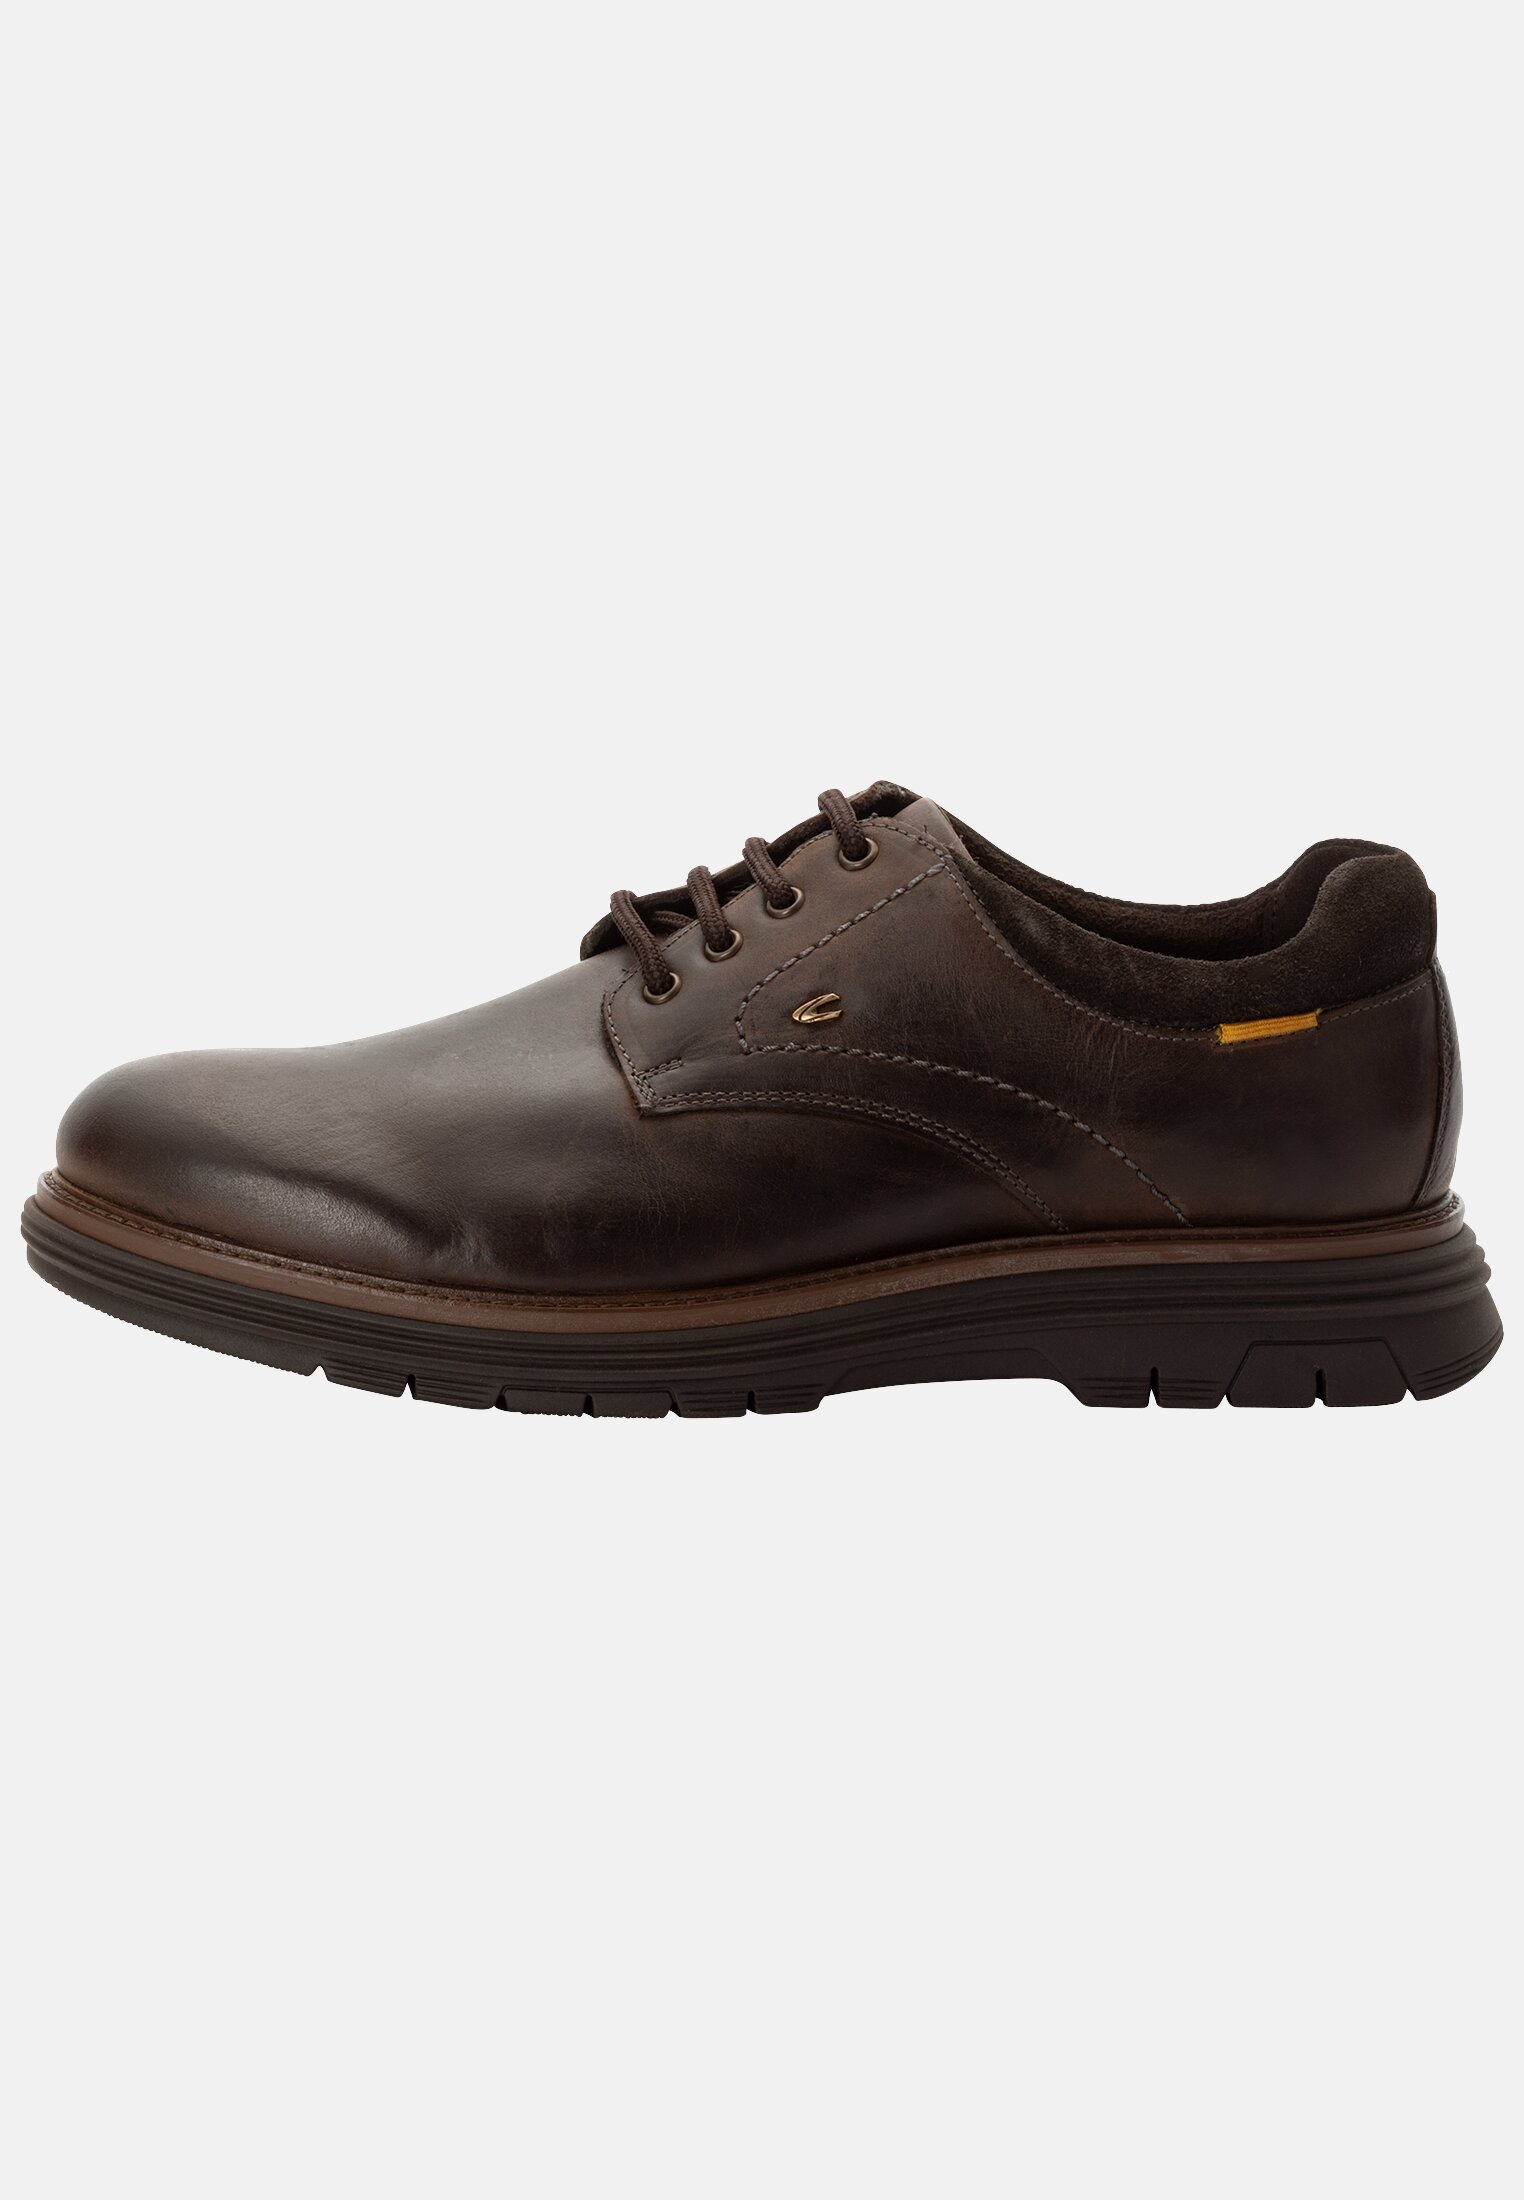 Camel Active Lace-up shoe made from nubuck leather